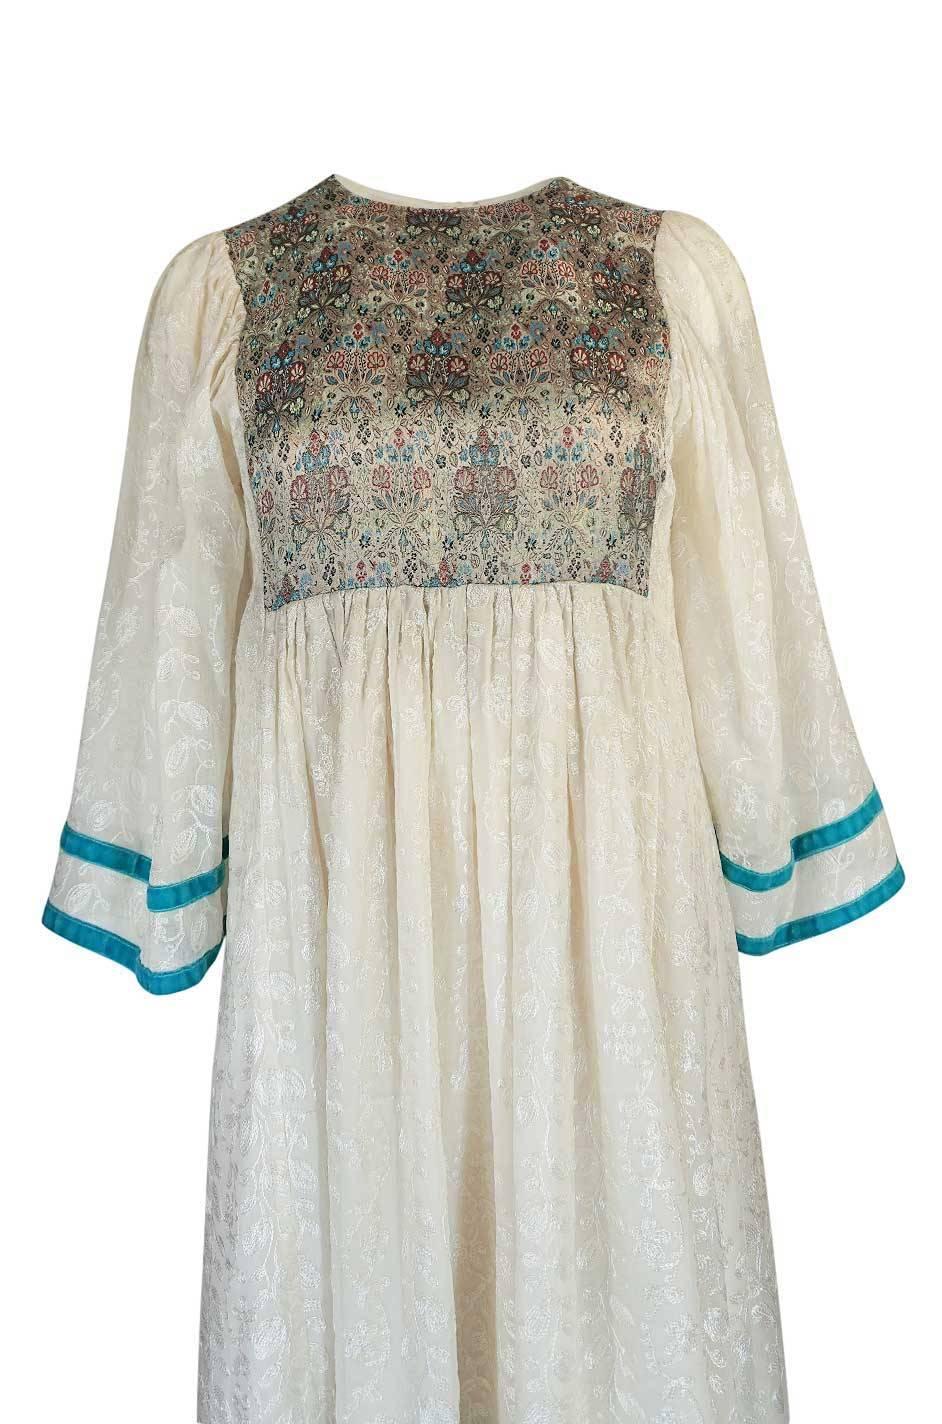 c1968 Thea Porter Embroidered Ivory & Brocade 'Faye' Dress 1